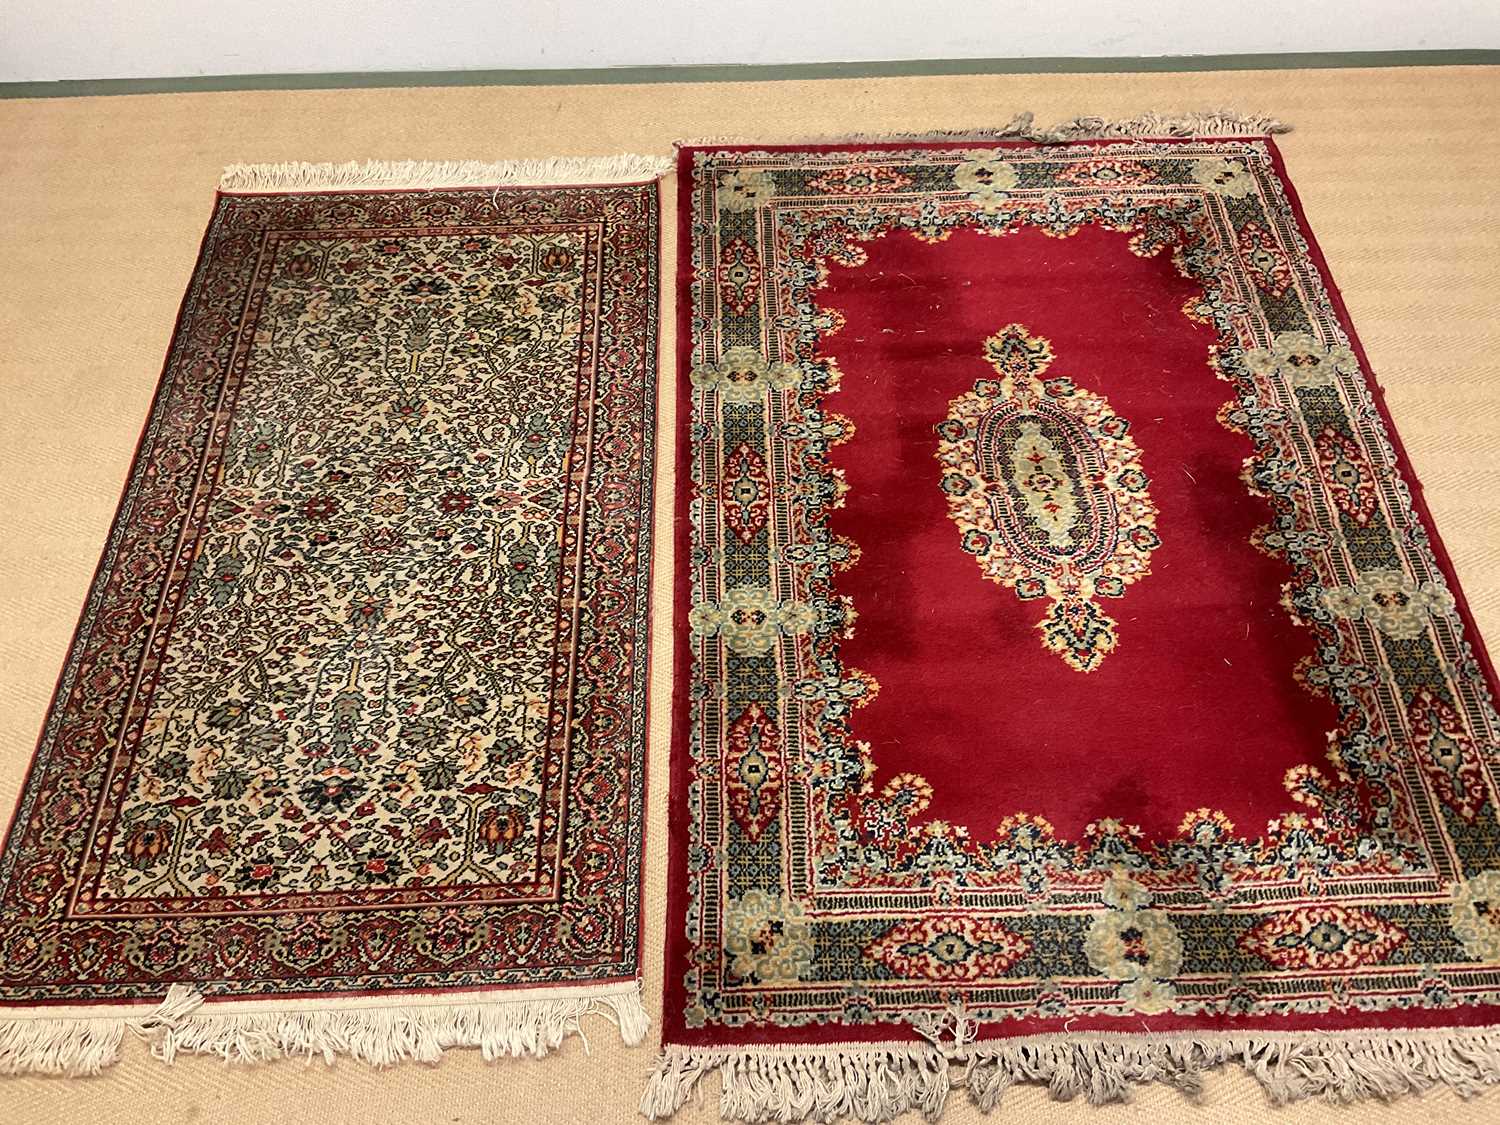 Two vintage Eastern rugs, one a dark red rug with central medallion and decorative border, 122 x